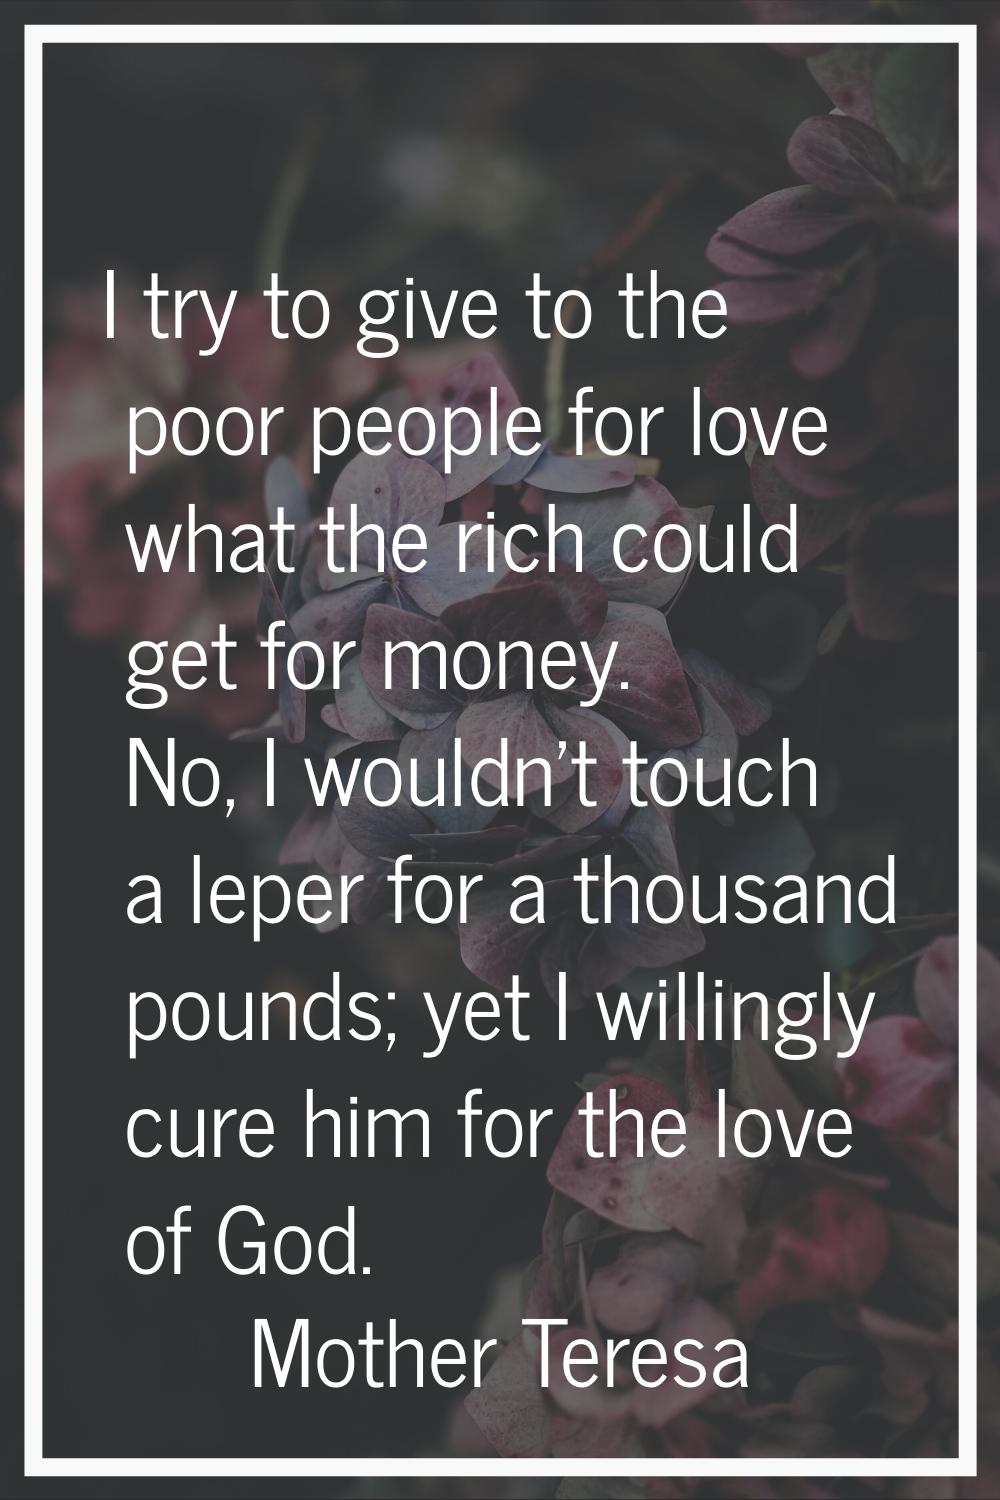 I try to give to the poor people for love what the rich could get for money. No, I wouldn't touch a